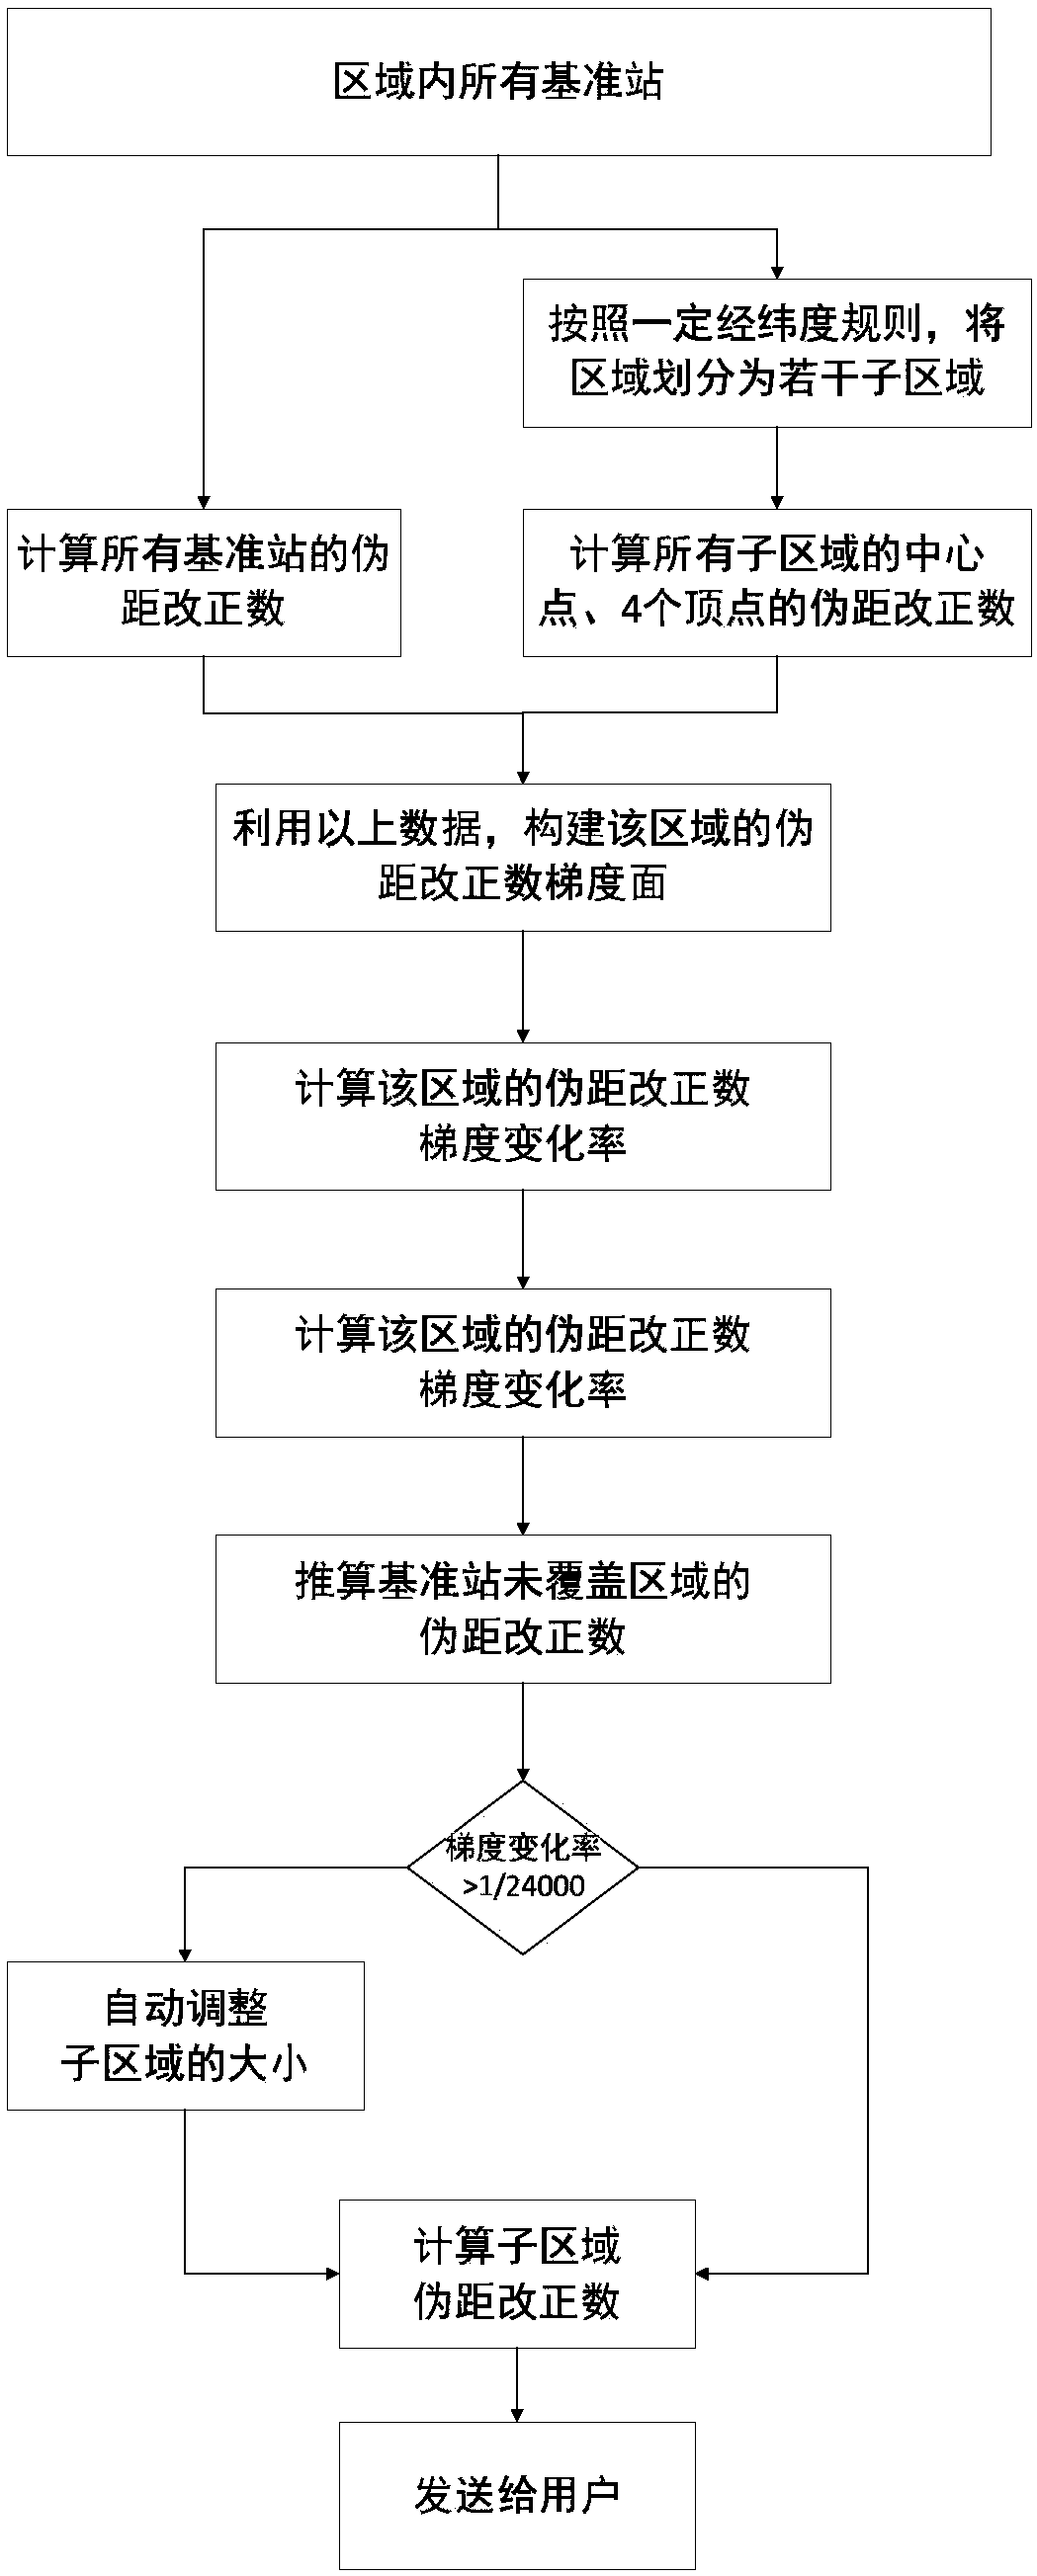 Dynamically adaptive Beidou sub-meter location service comprehensive coverage method